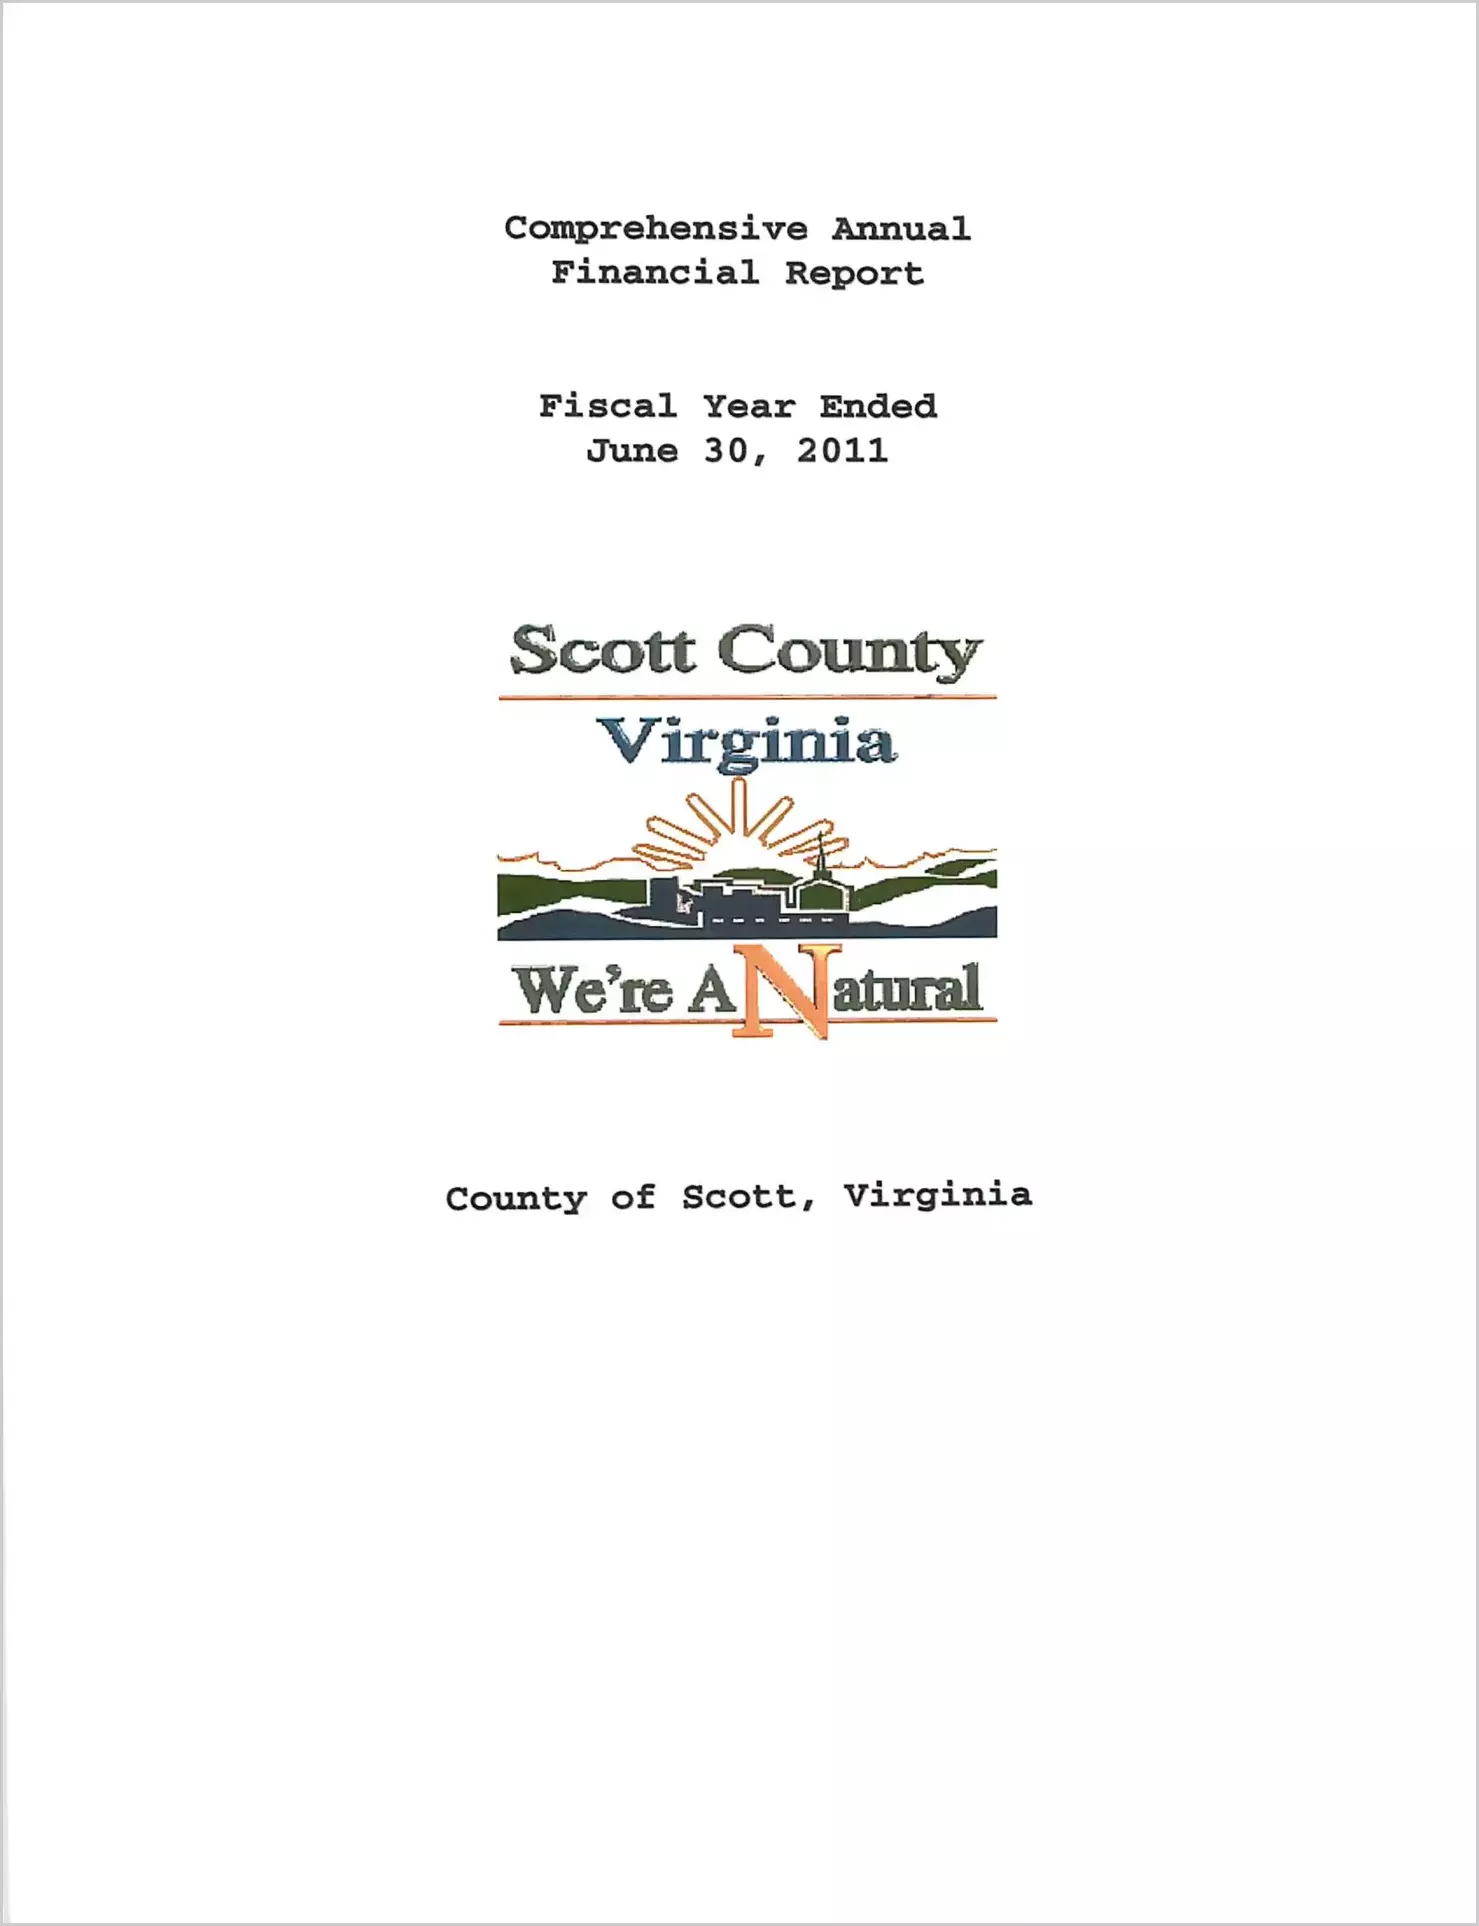 2011 Annual Financial Report for County of Scott